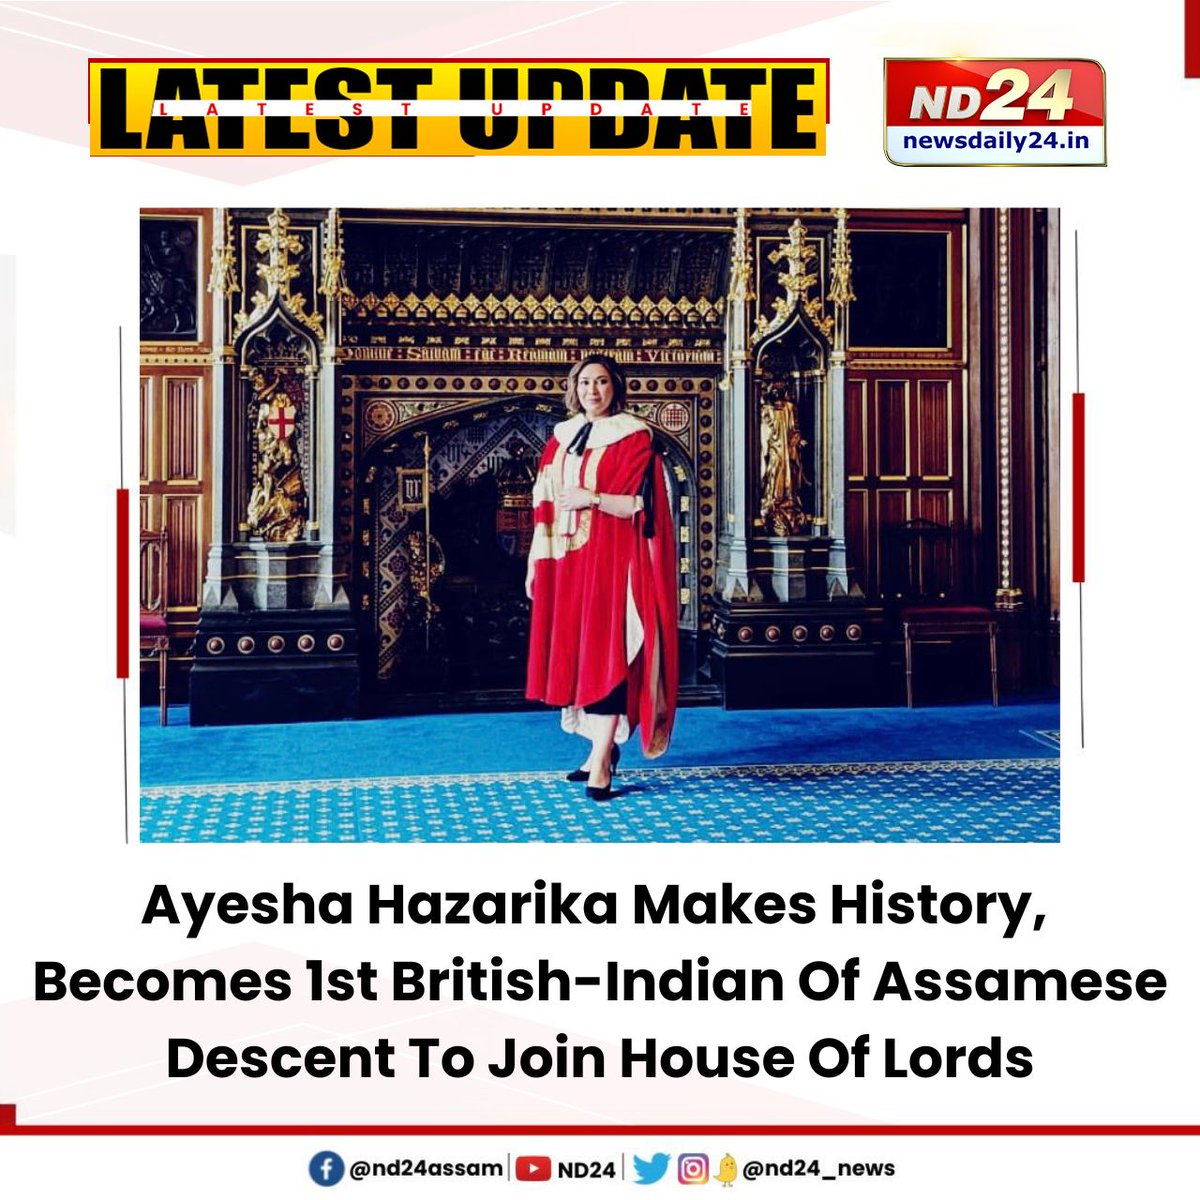 In a historic move, #AyeshaHazarika, British-Indian person of Assamese descent has become the first of her origin to be appointed to the #HouseofLords, the upper chamber of the #BritishParliament.

Taking her seat as ‘Baroness Hazarika of Coatbridge’, with a (cont)